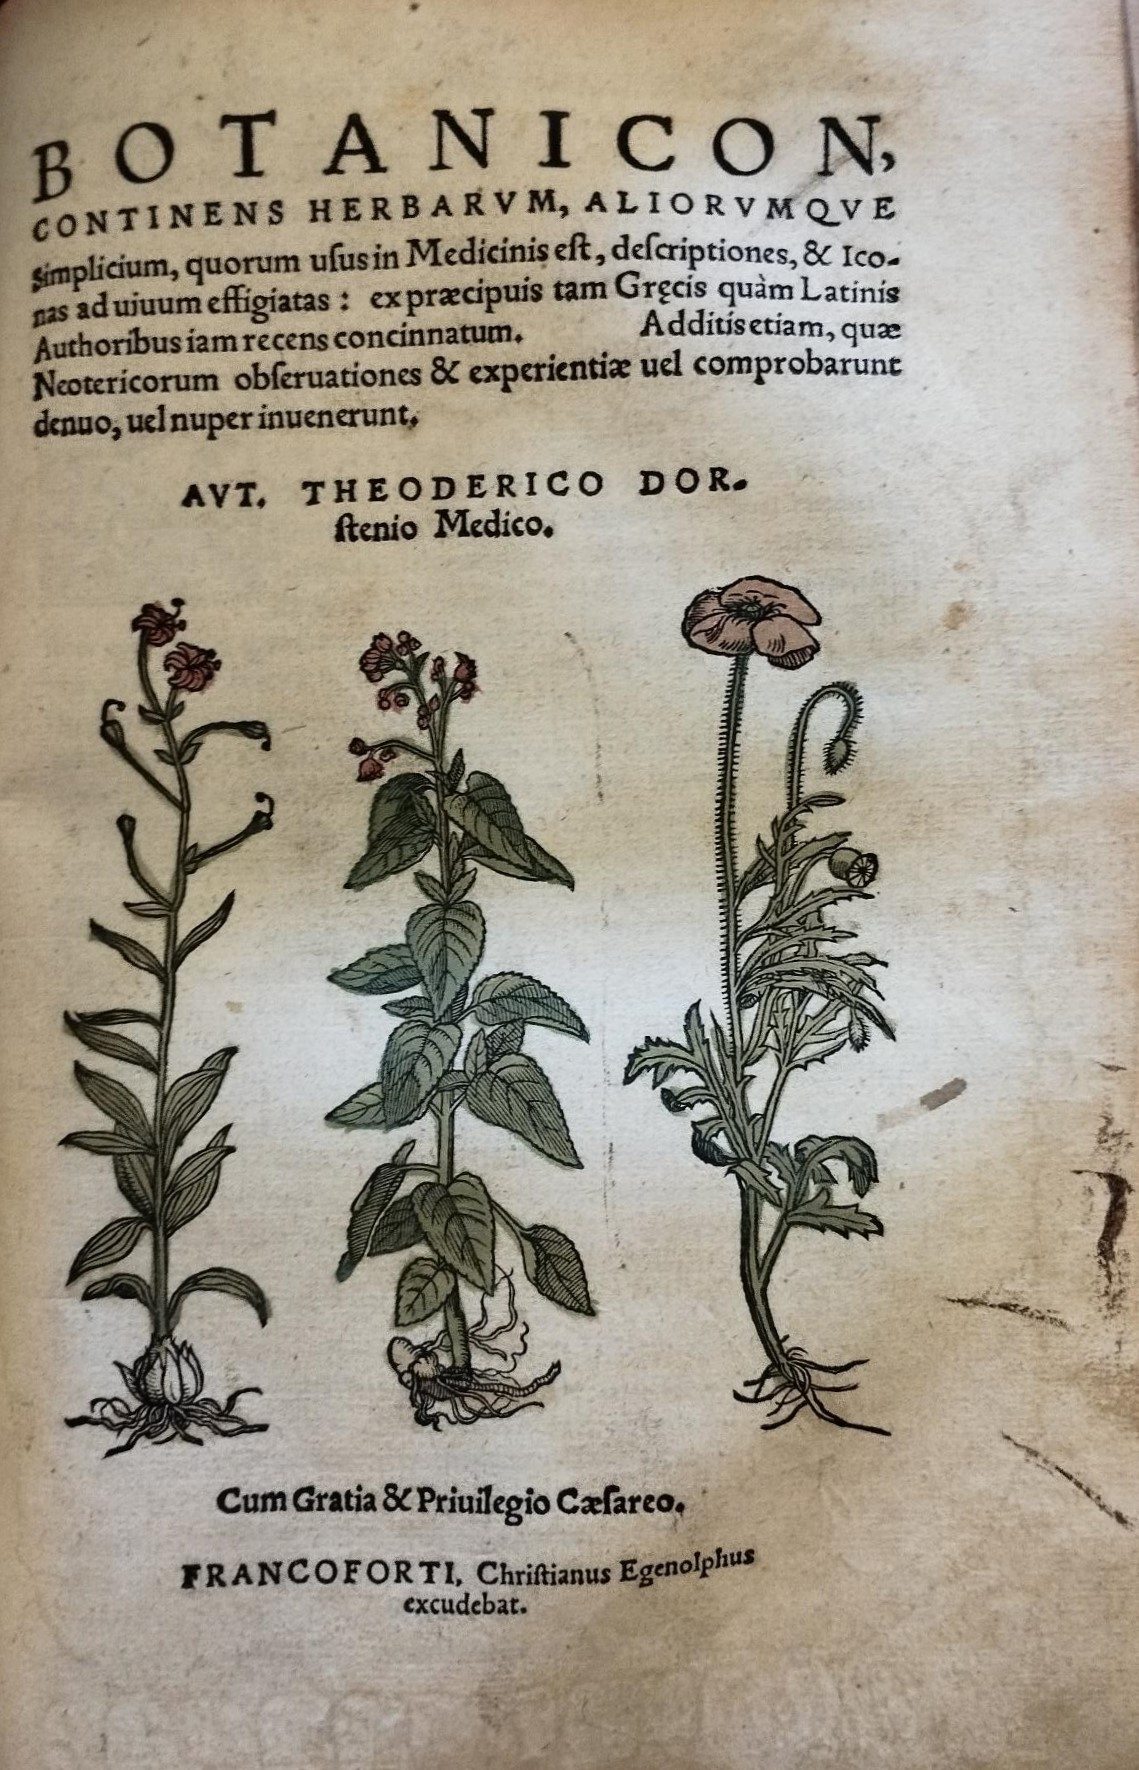 Illustrated title page of the book "Botanicon" by Theodorico Dorsten. 